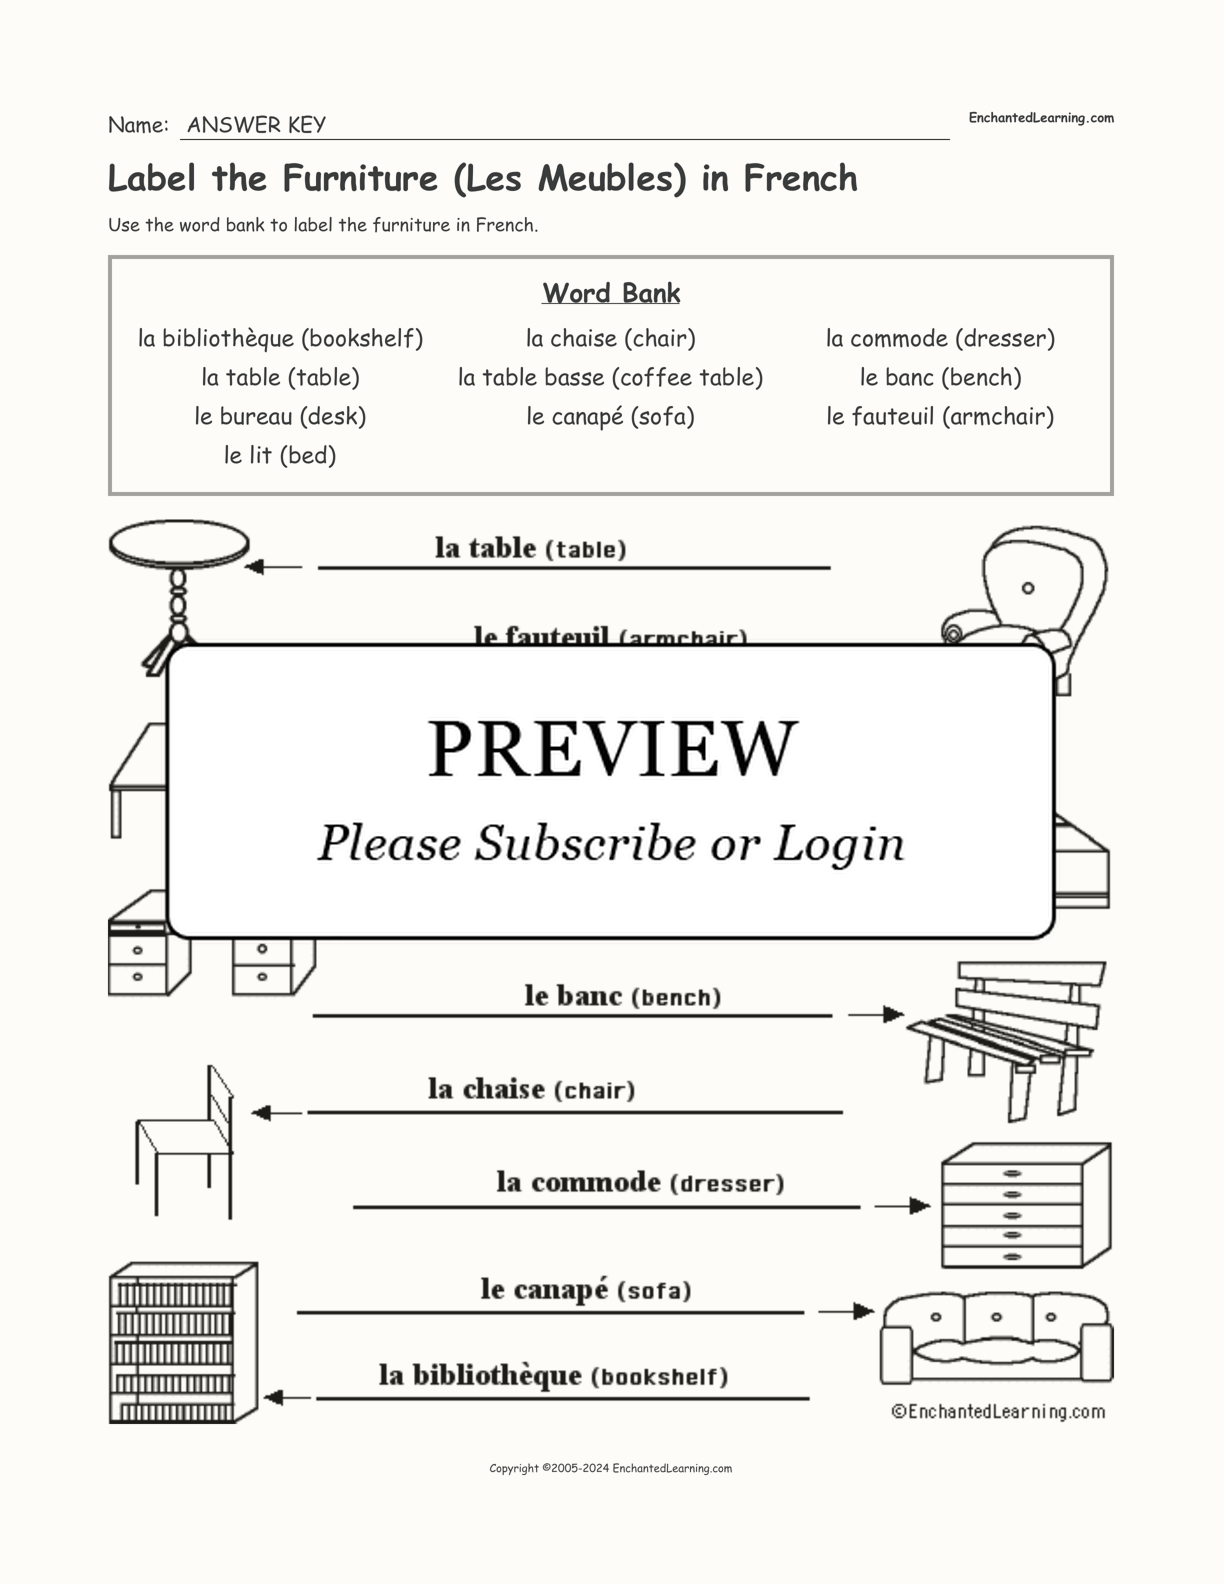 Label the Furniture (Les Meubles) in French interactive worksheet page 2